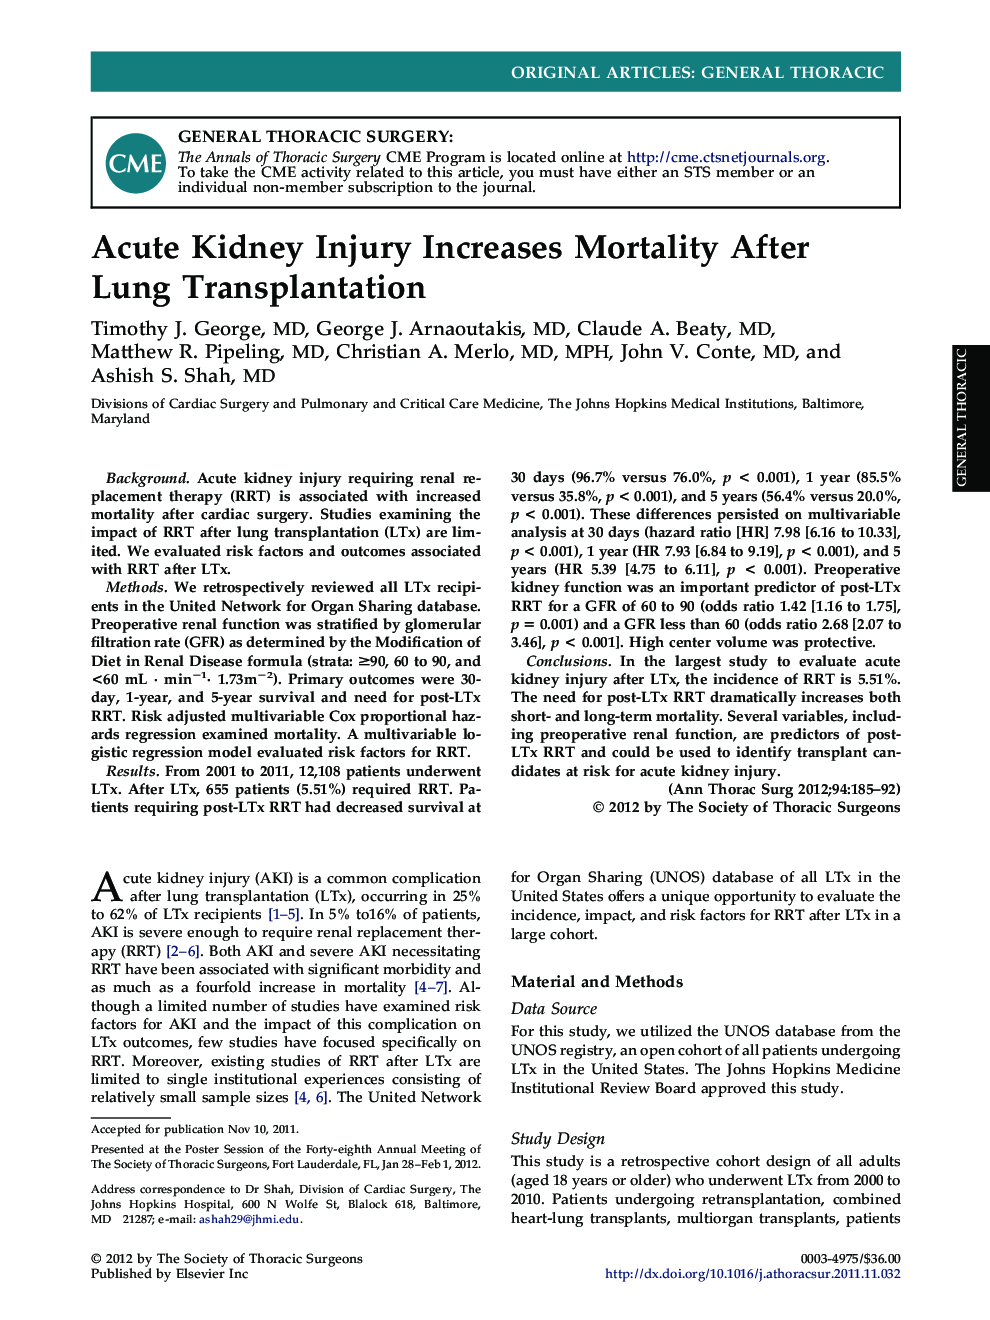 Acute Kidney Injury Increases Mortality After Lung Transplantation